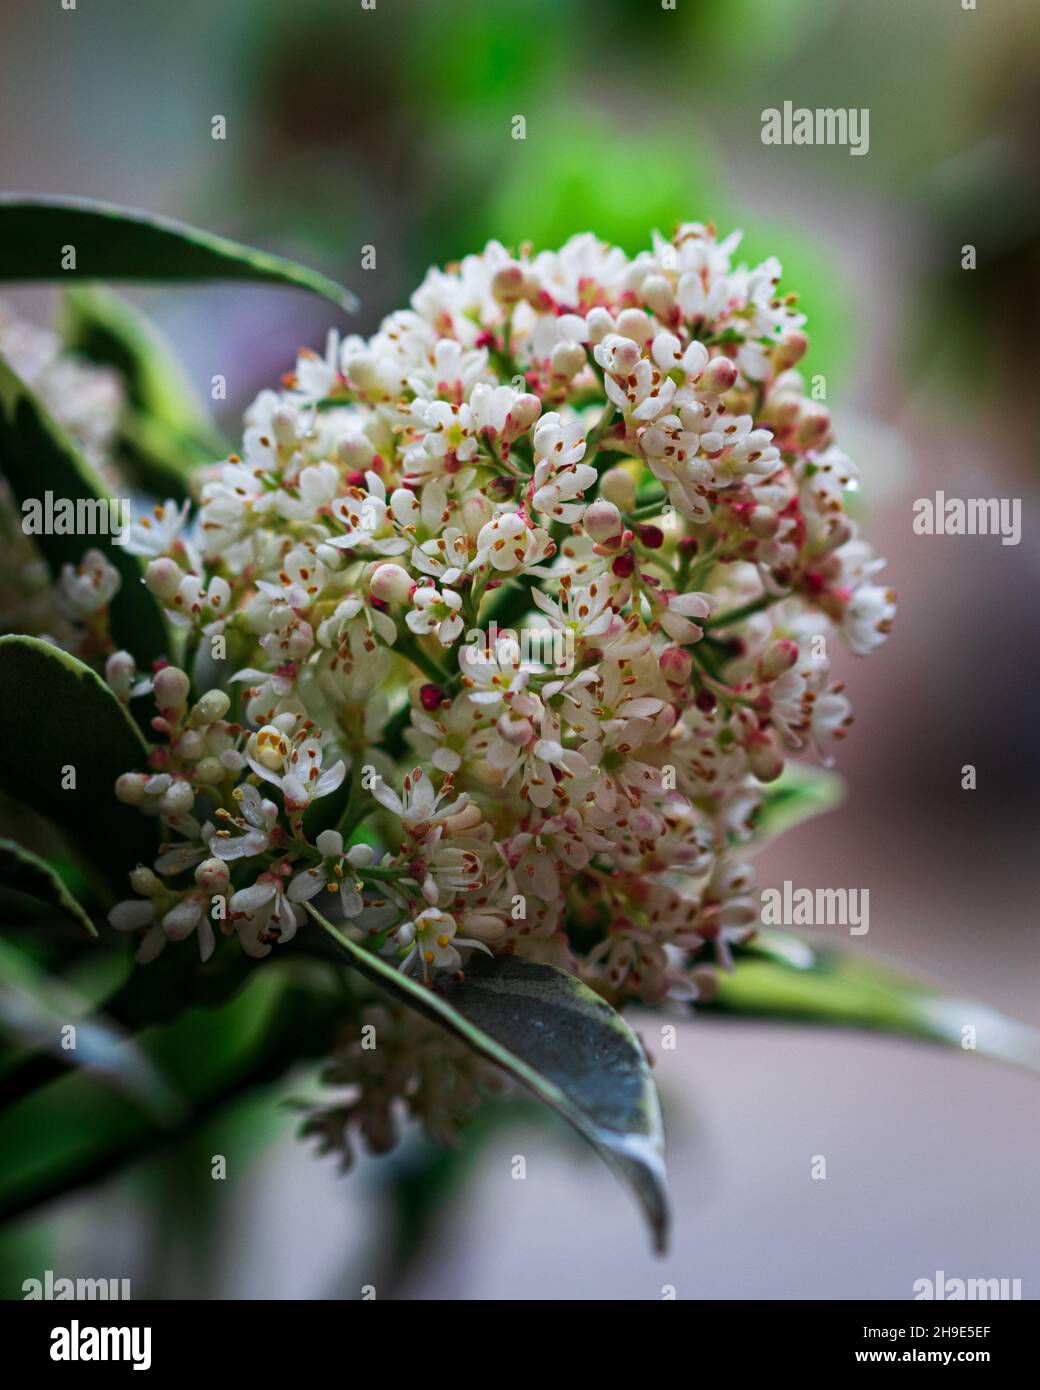 Closeup of scented spring flowers of the compact evergreen Skimmia japonica bush Stock Photo